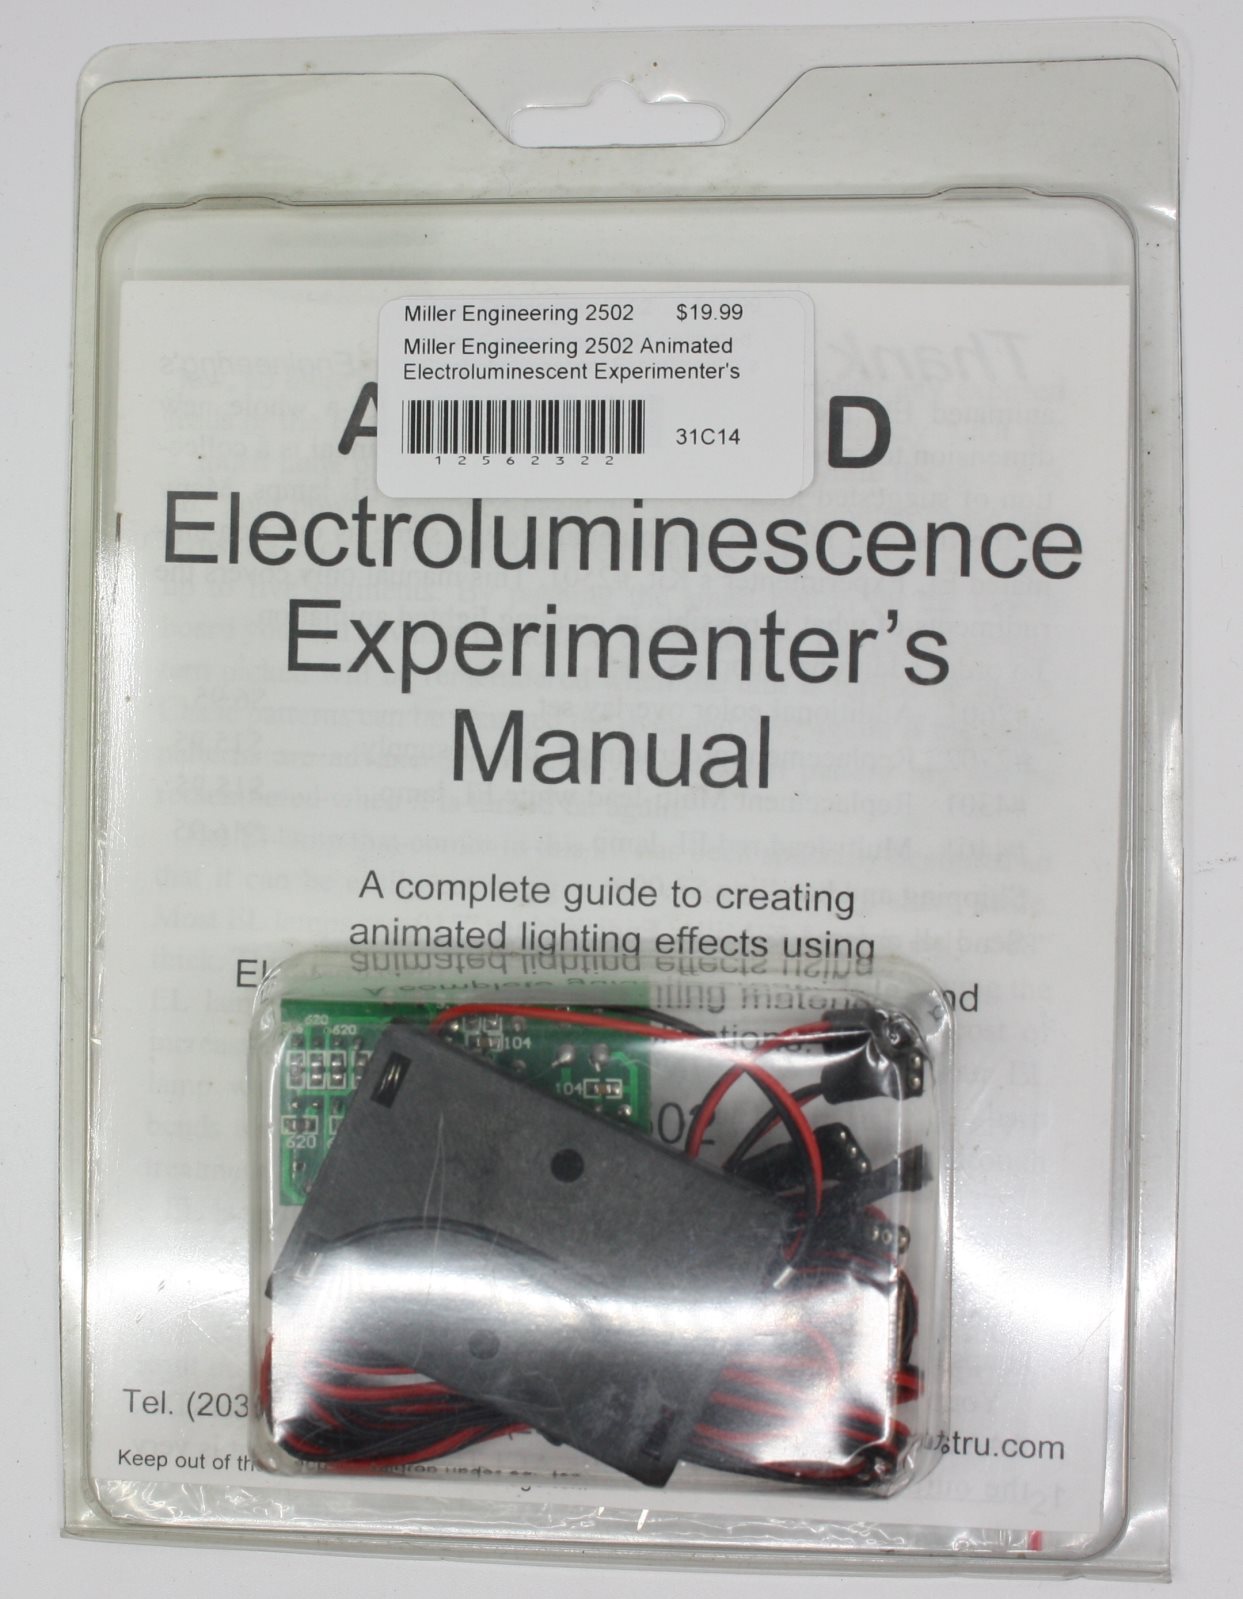 Miller Engineering 2502 Animated Electroluminescent Experimenter's Kit